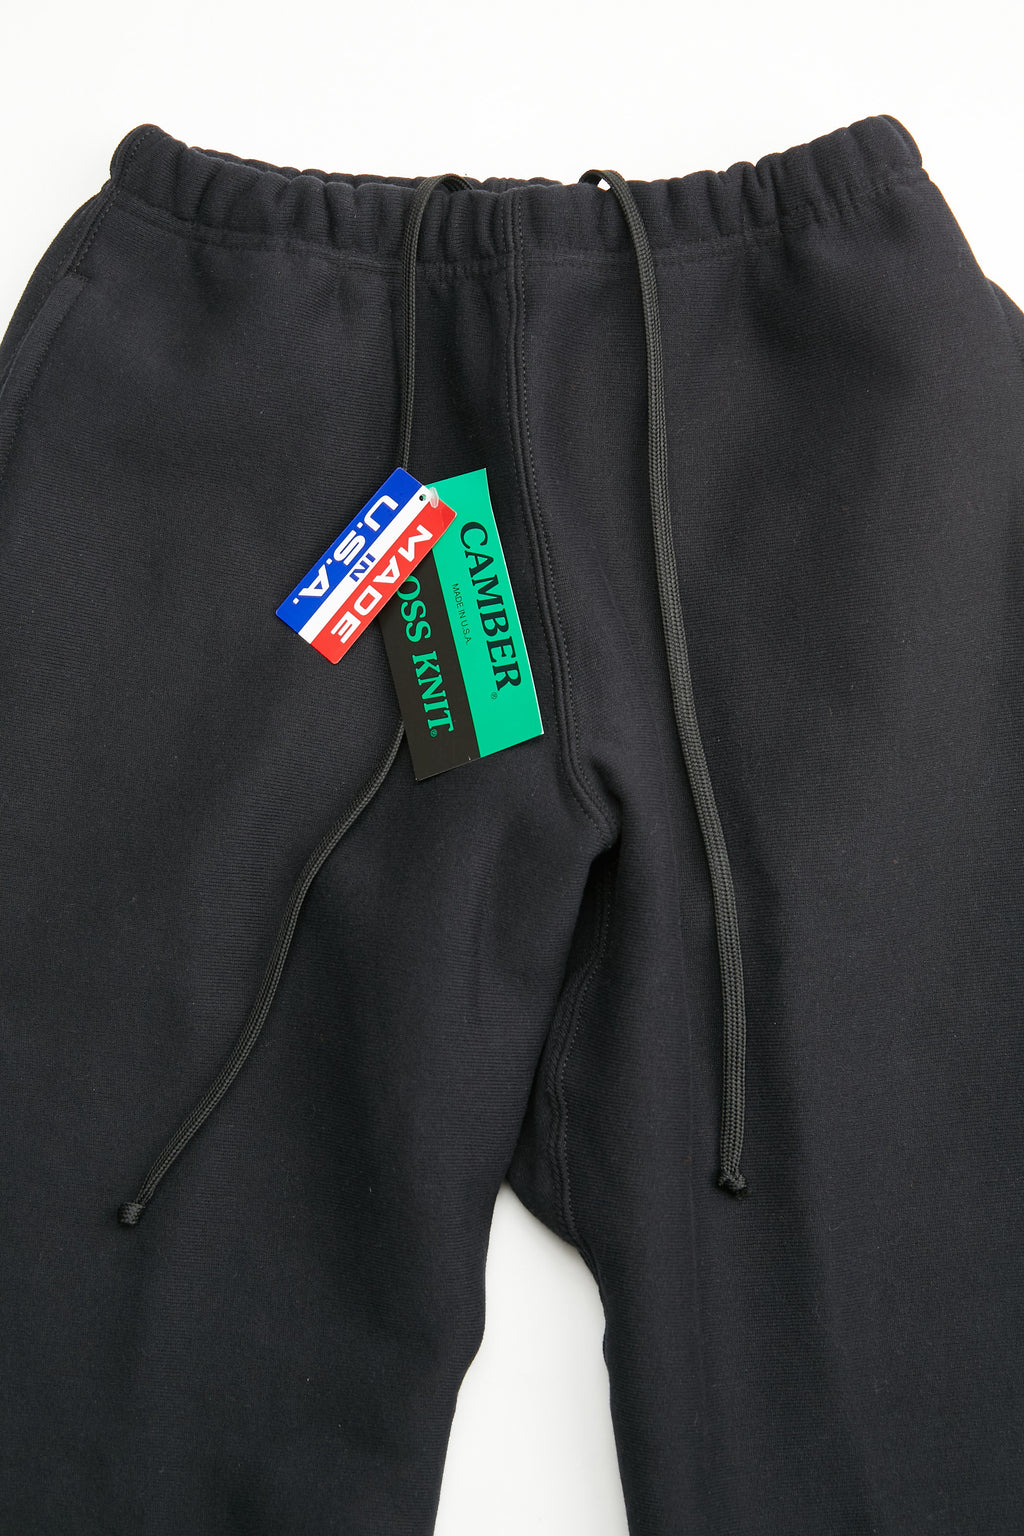 CAMBER Heavy Weight/12oz Sweat Pants Black